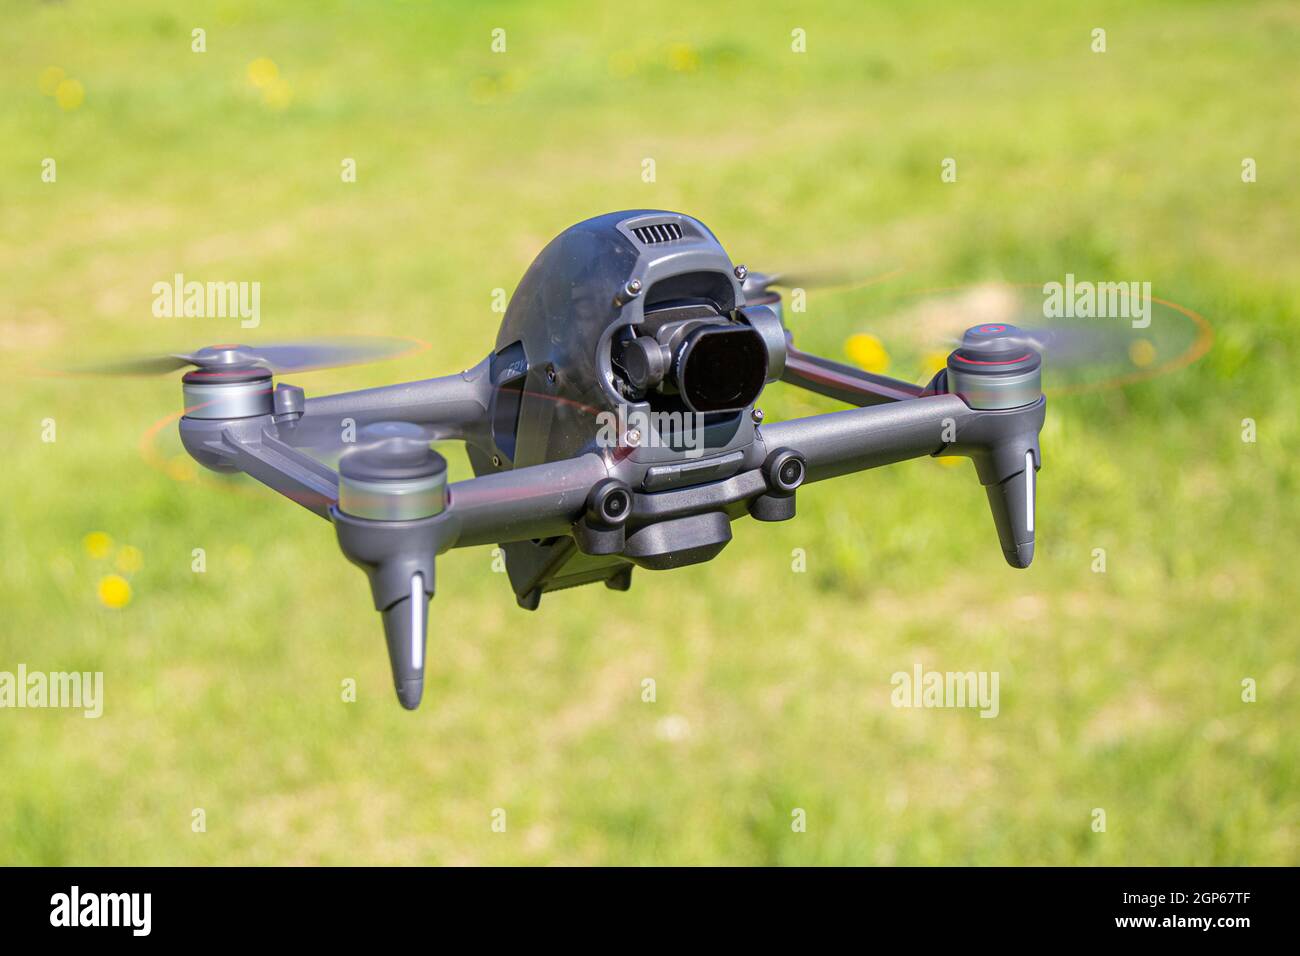 New FPV drone is flying during a sunny day on grass in beckground. Top Front View. Headless Quadcopter with Digital 4K 60 fps camera and Remote Contro Stock Photo